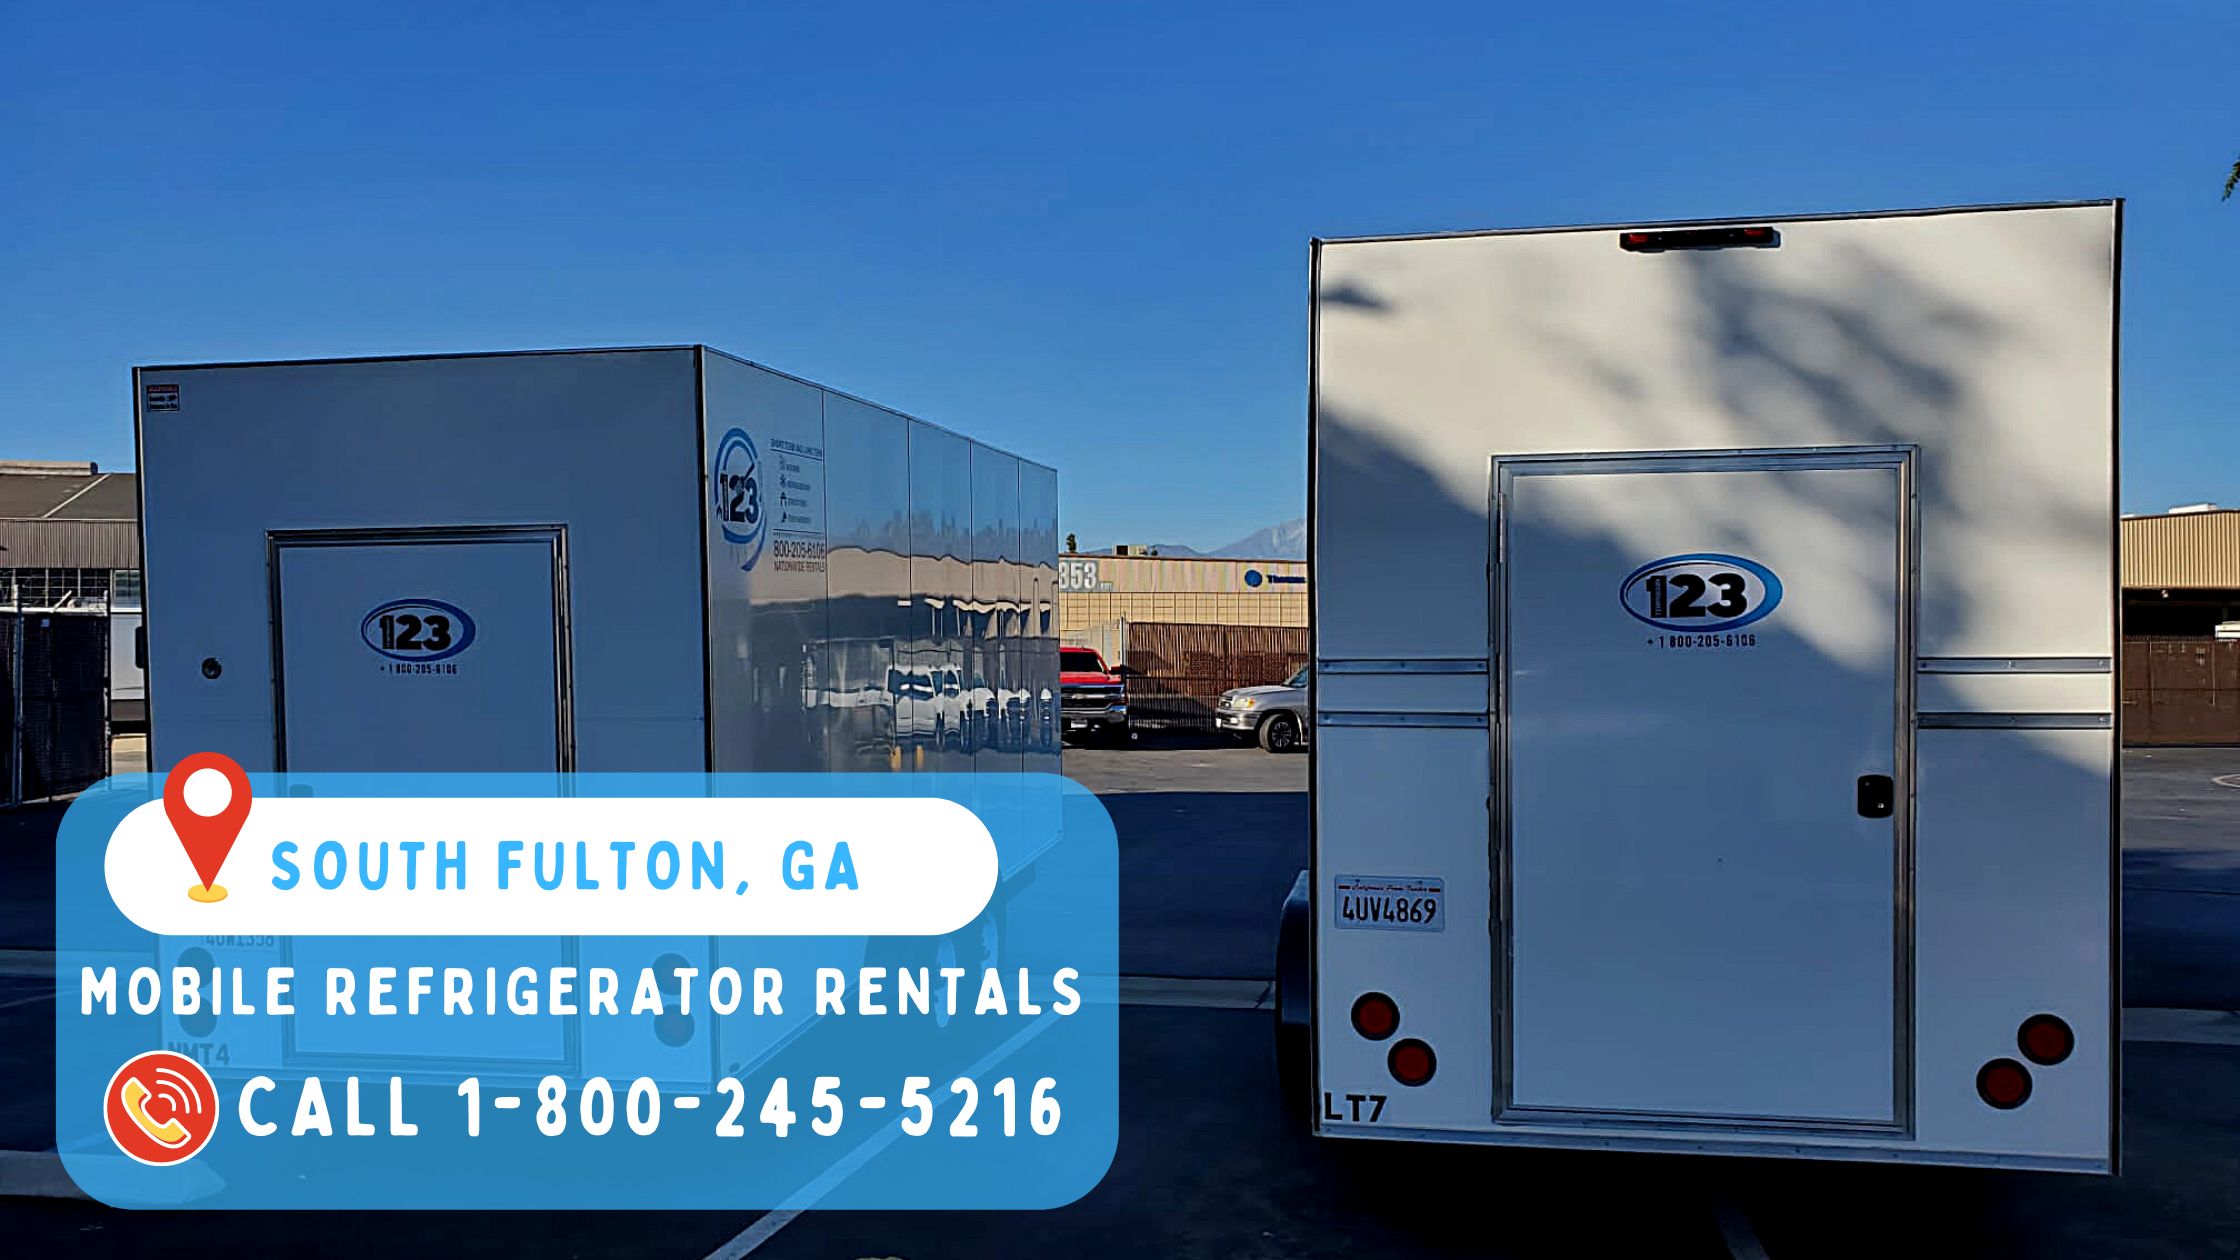 Mobile refrigerator rentals in South Fulton